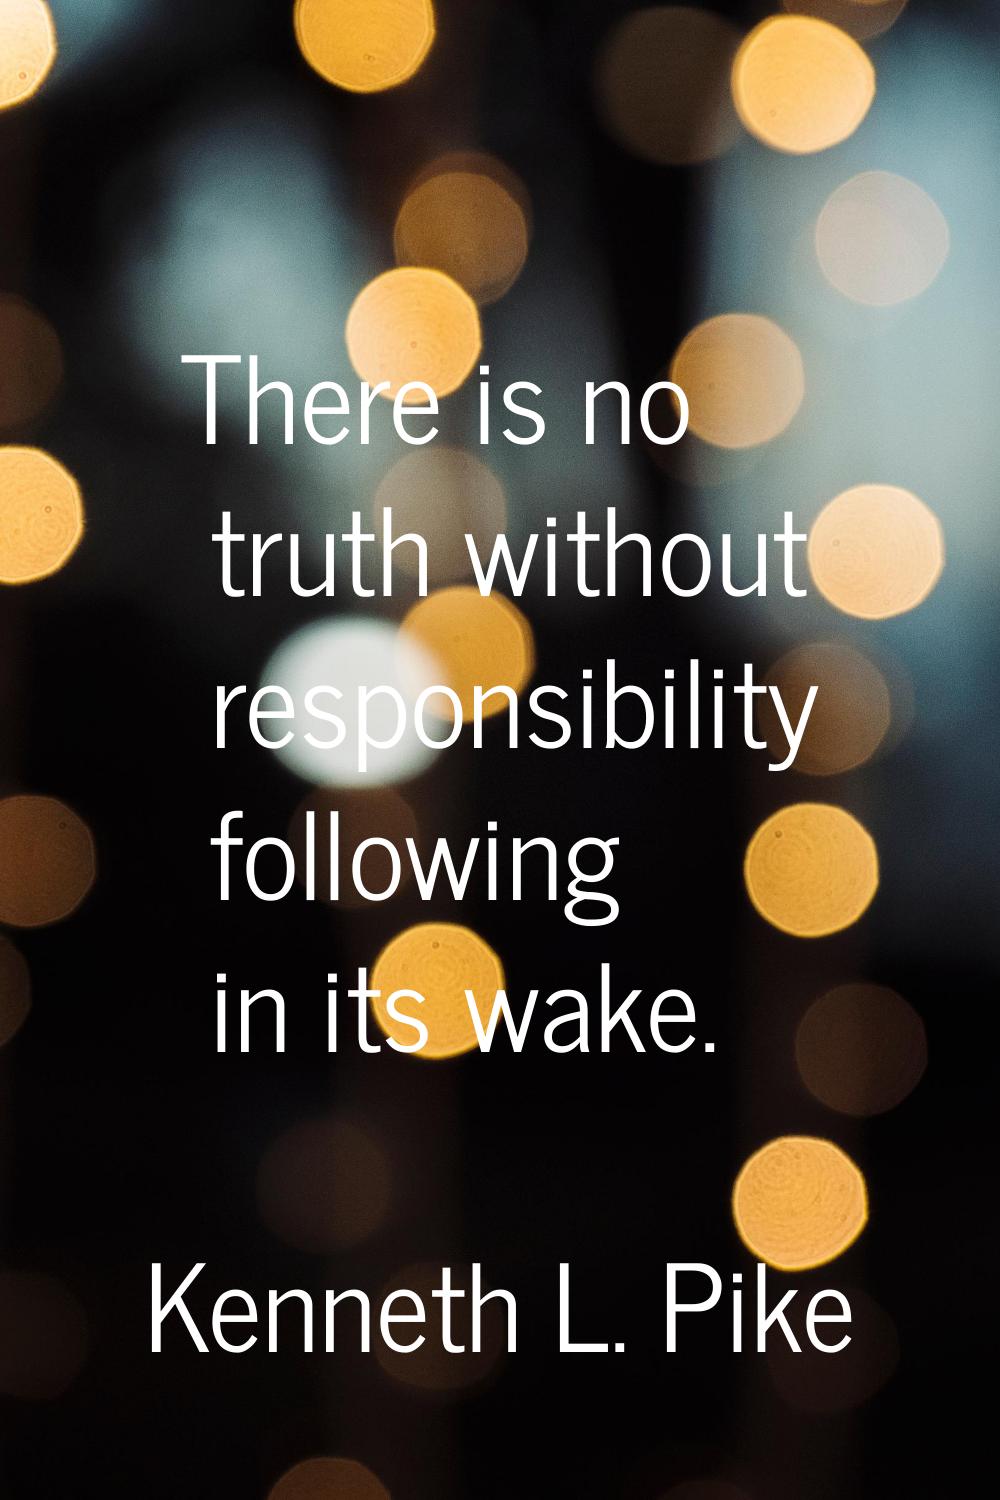 There is no truth without responsibility following in its wake.